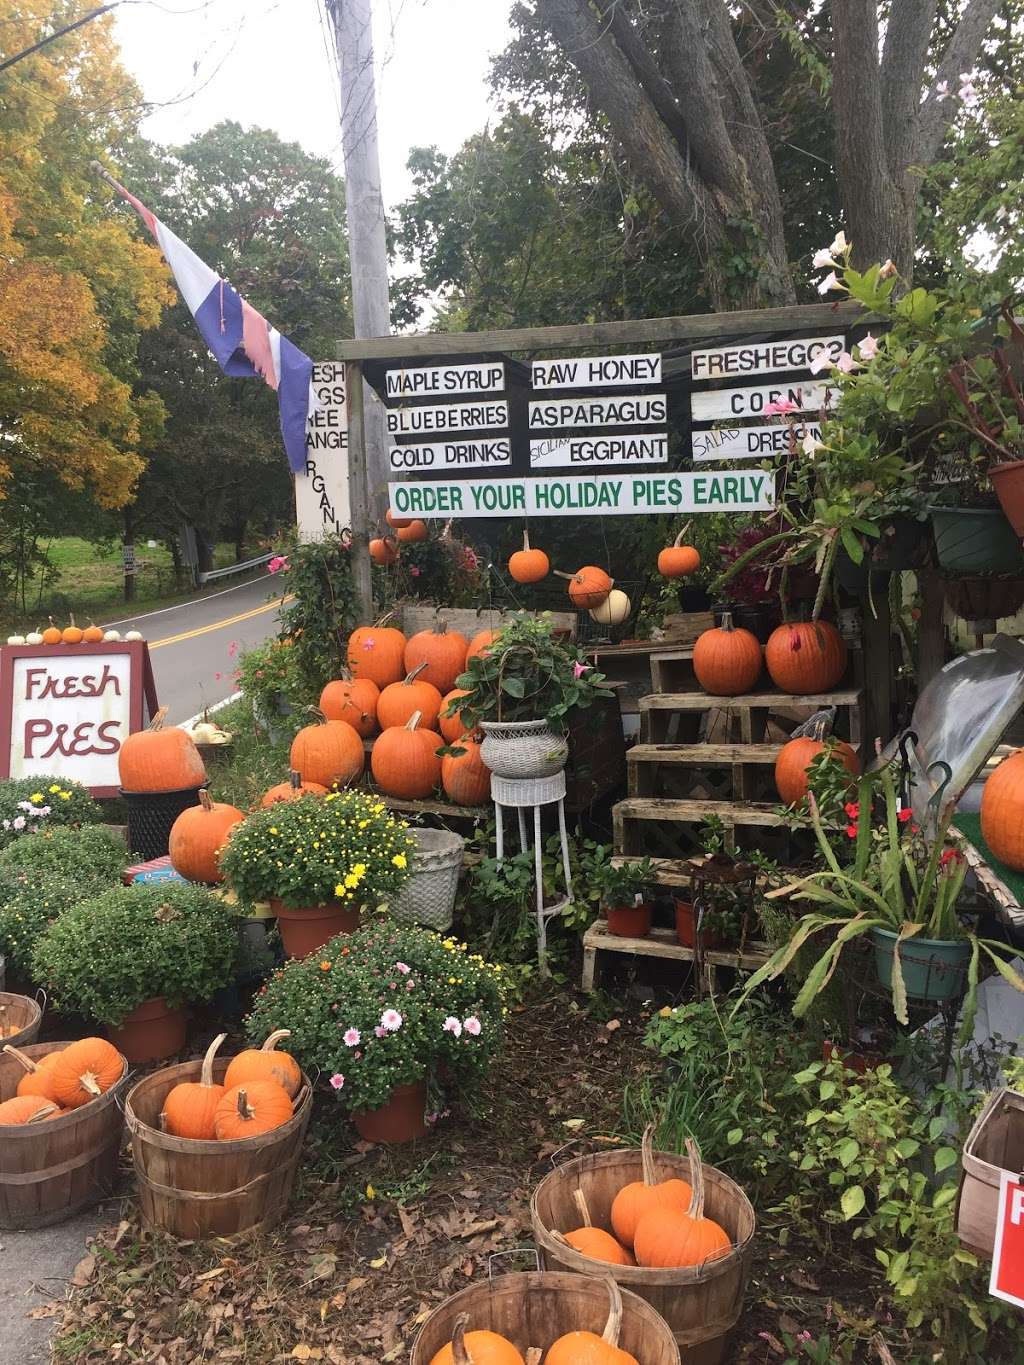 Johns Farmstand | 105 Southern Ave, Essex, MA 01929